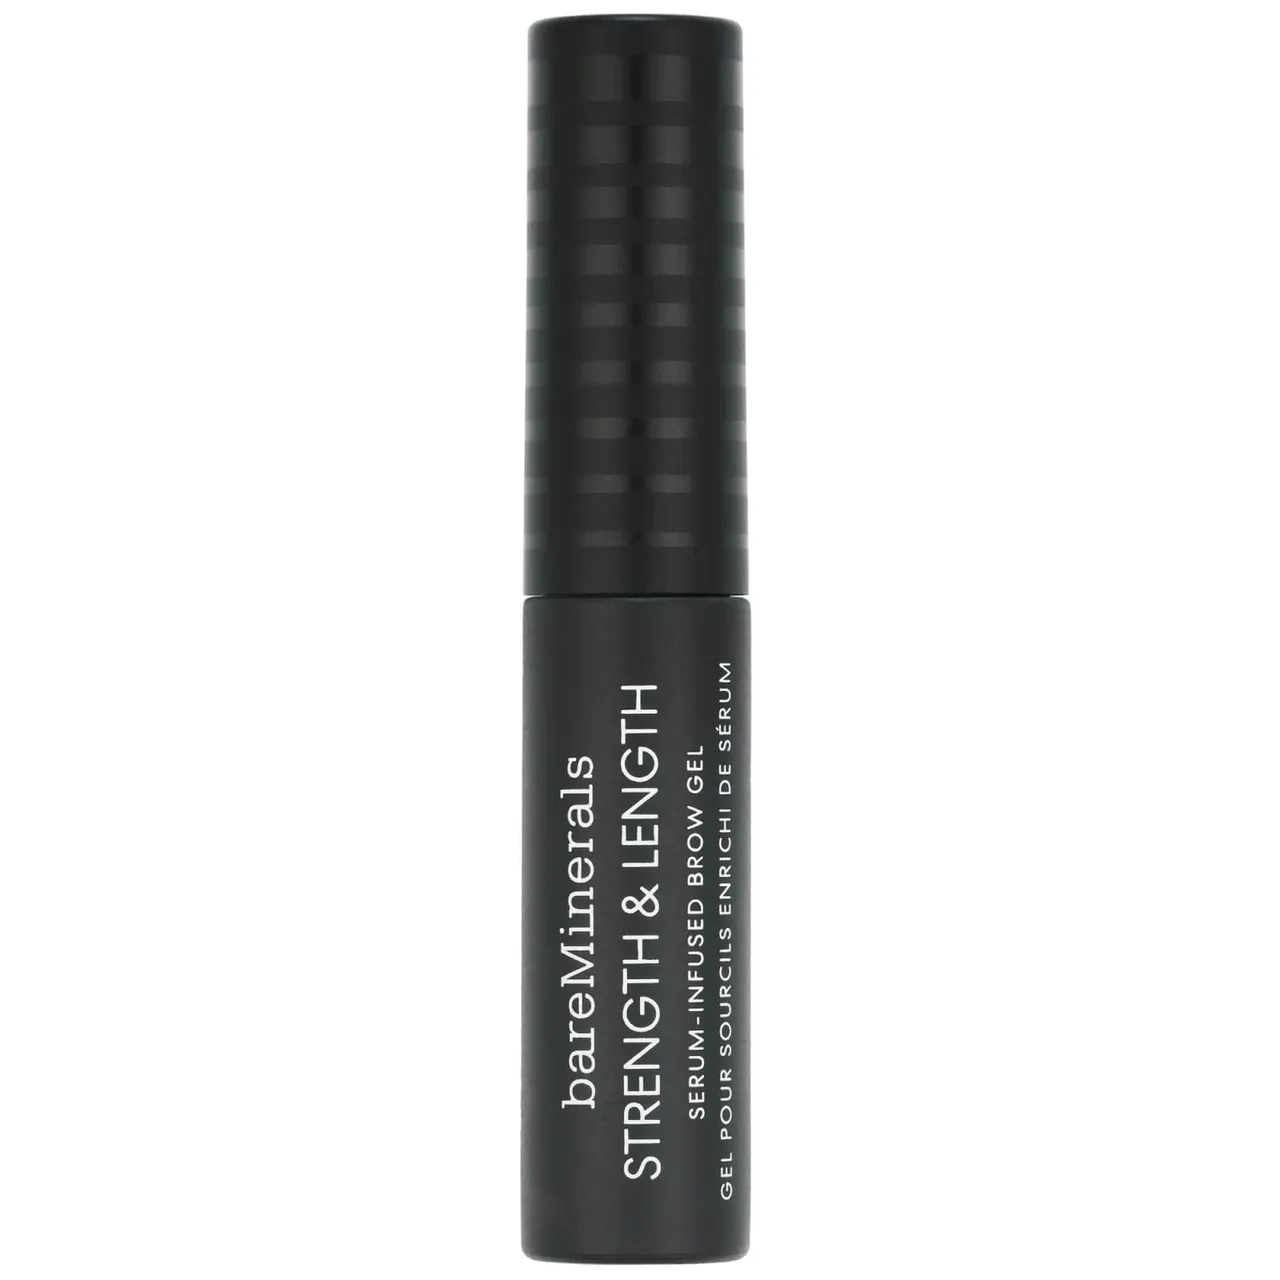 bareMinerals Strength and Length Brow Gel 5ml (Various Shades) - Chesnut